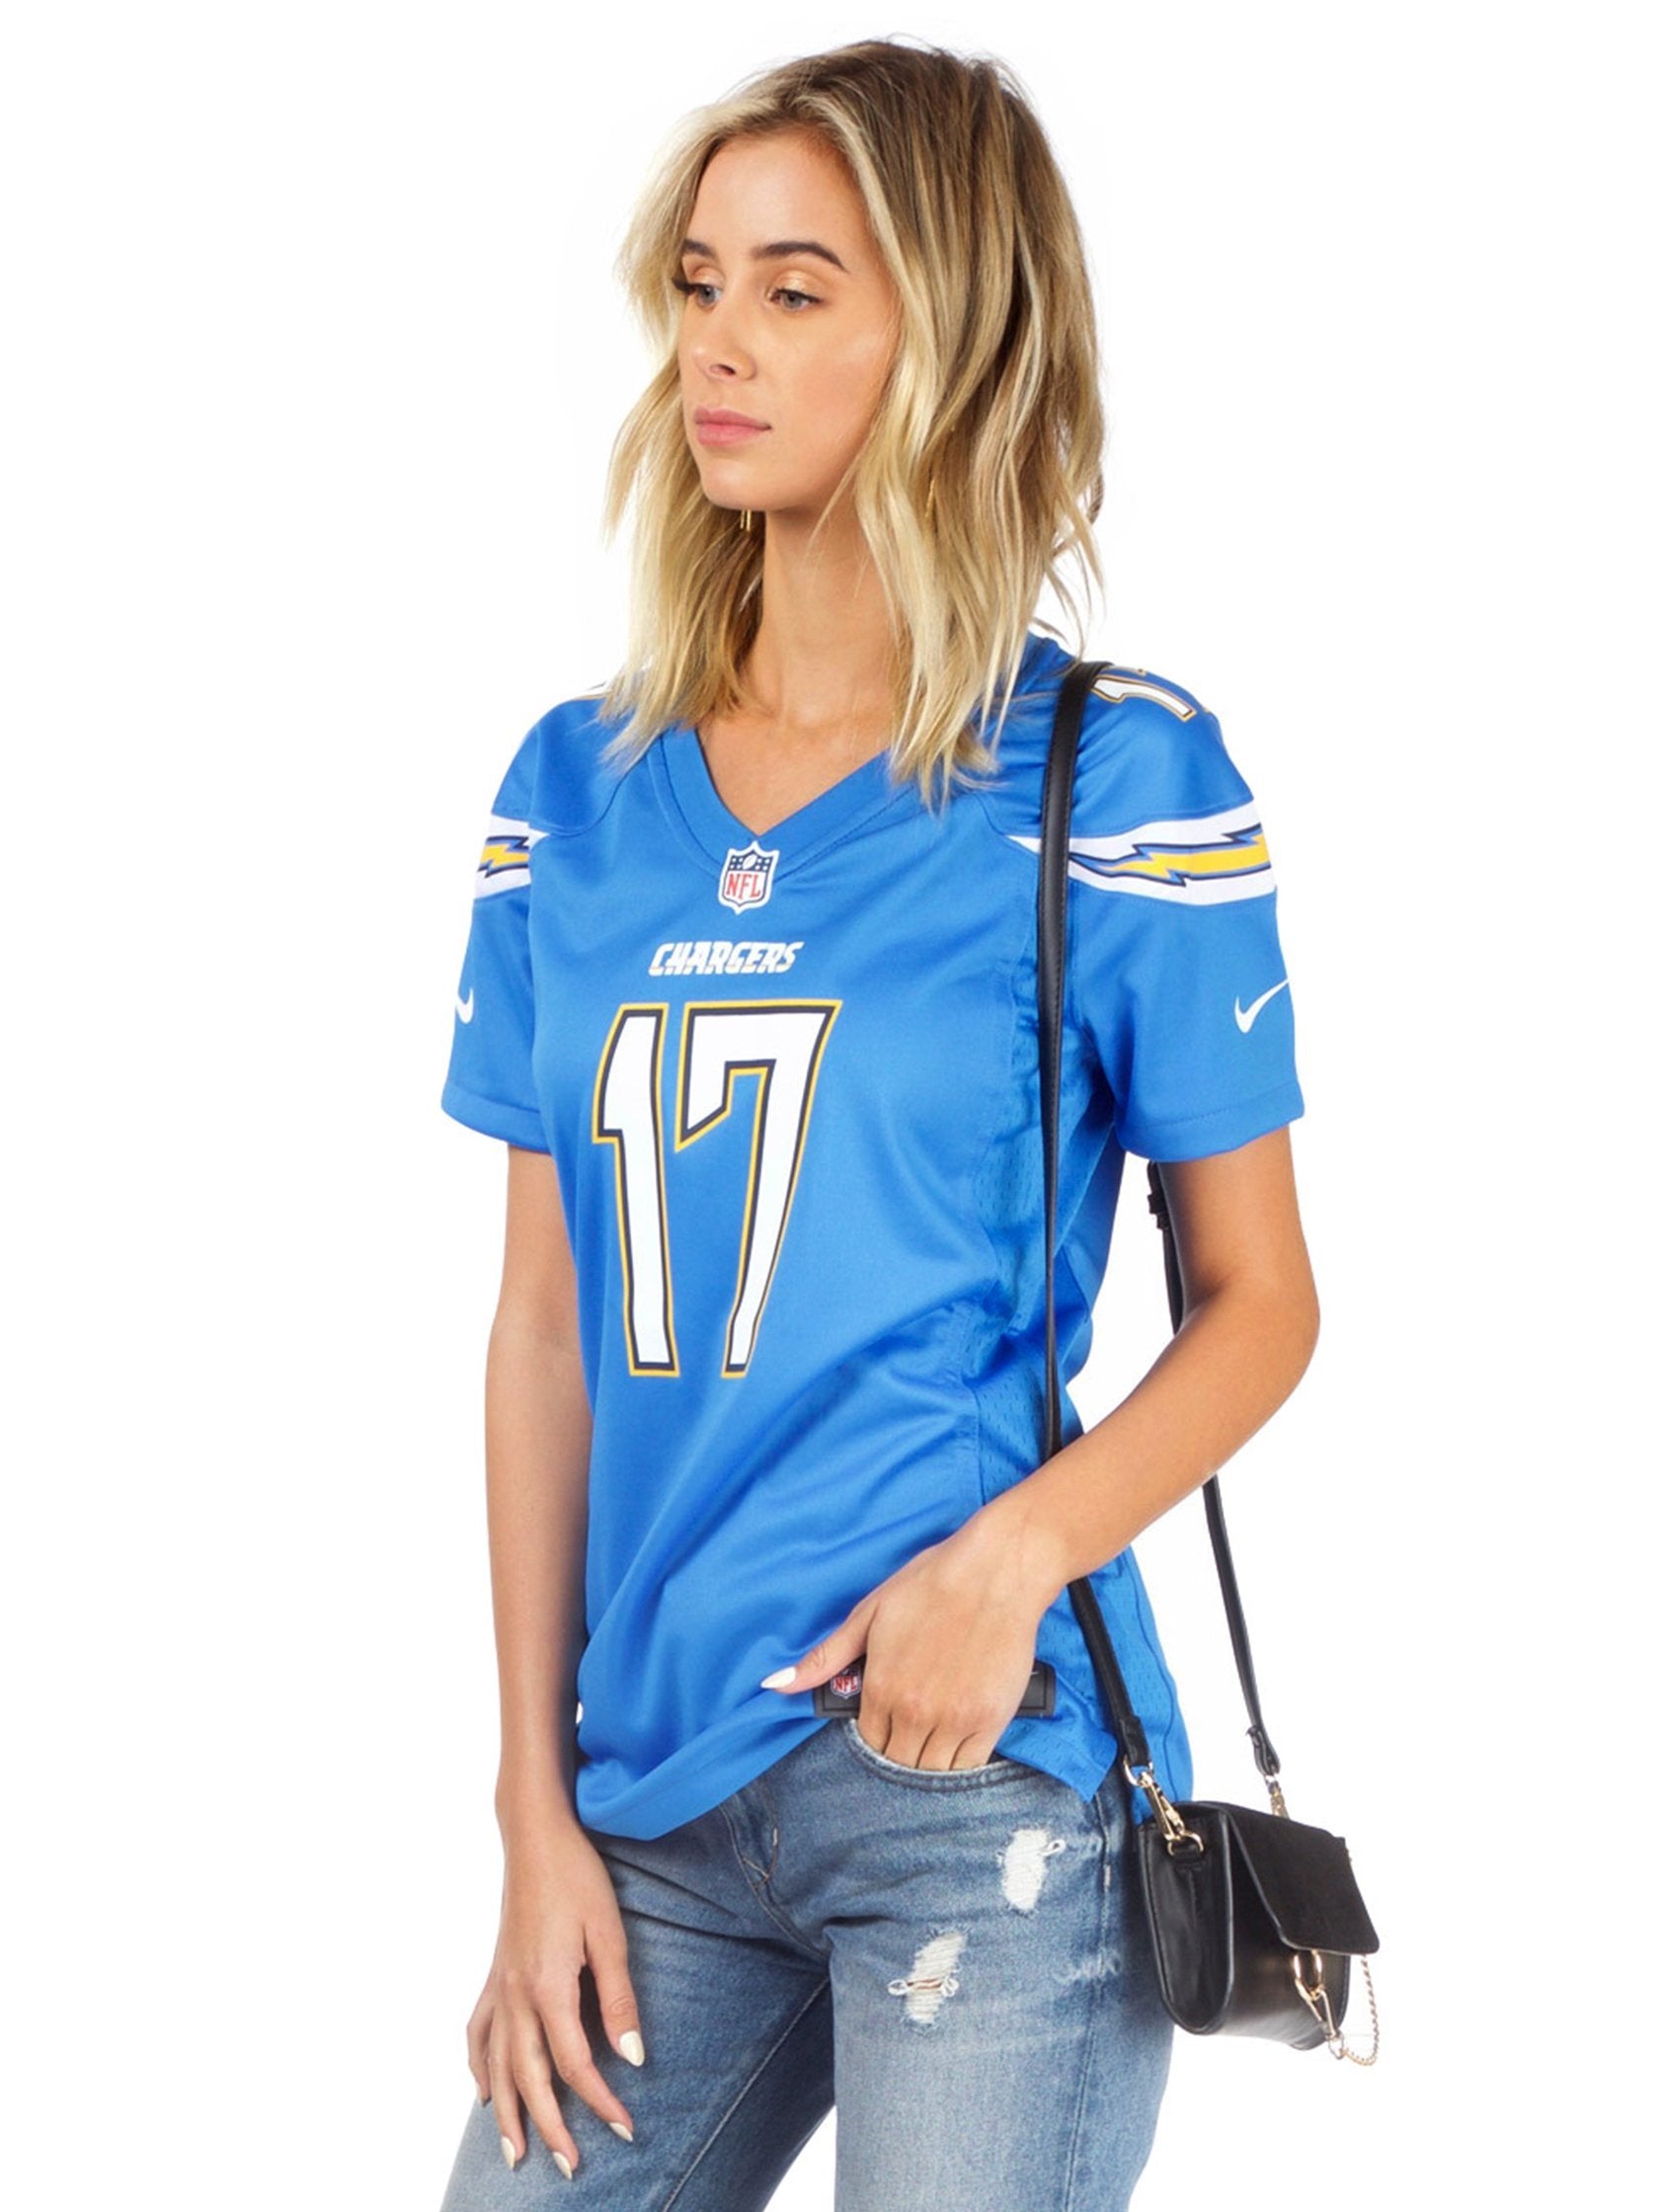 chargers female jersey cheap online